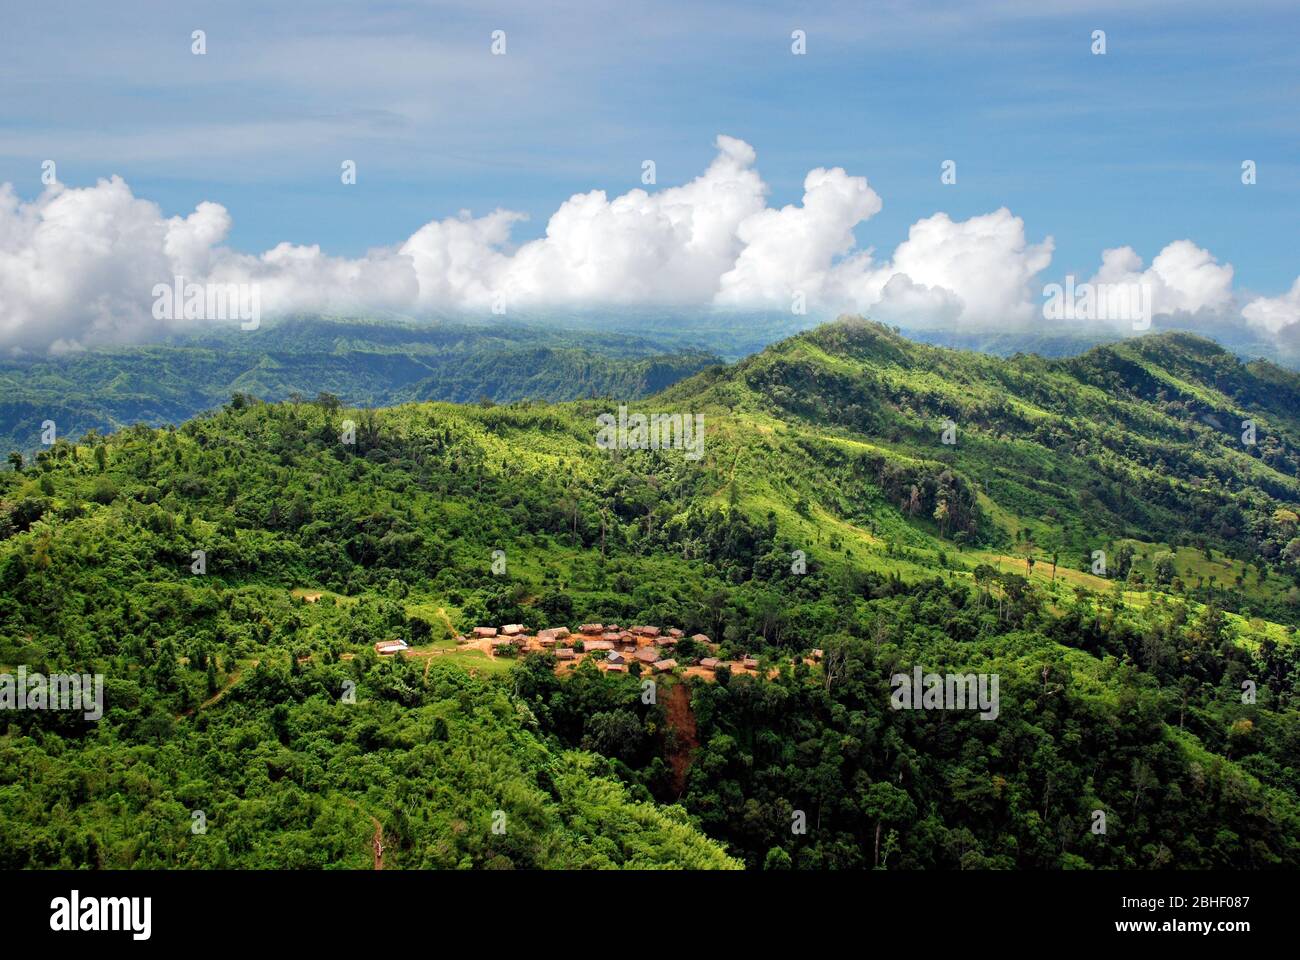 Stock Photo - View of the mountain from above the clouds. the photo is taken in Bandarban, Bangladesh Stock Photo